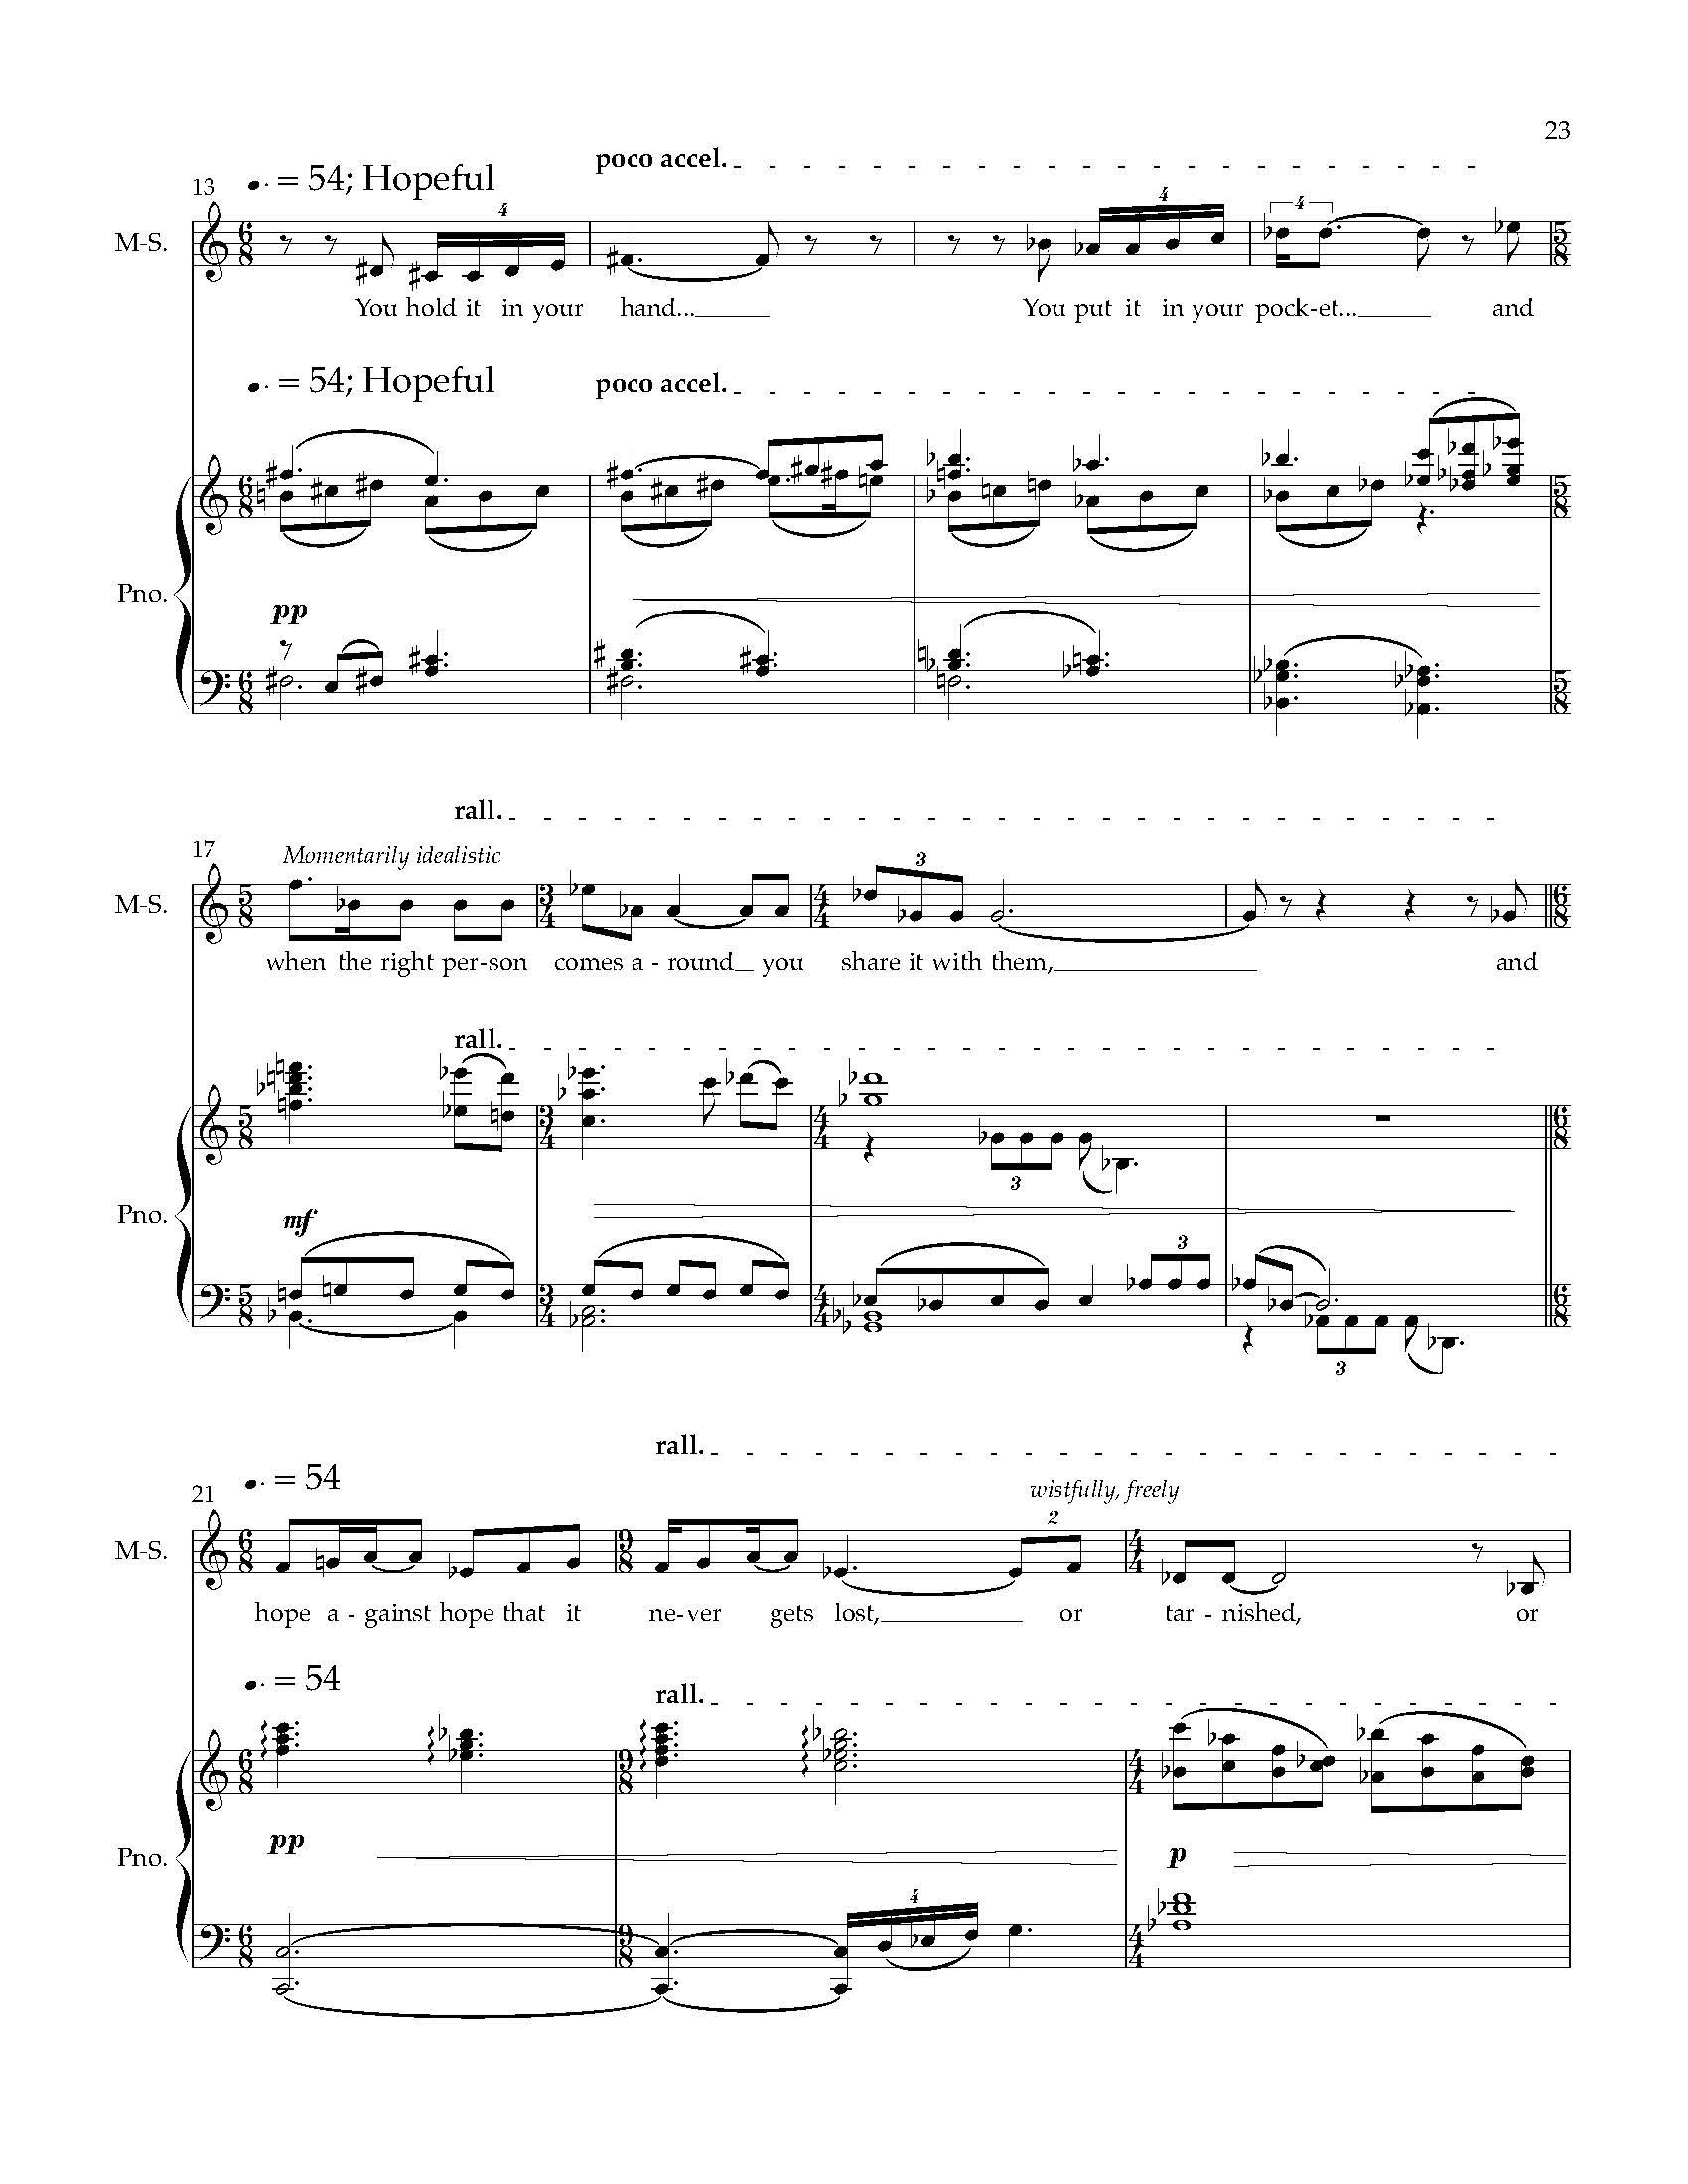 Five Arias from HWGS - Complete Score (1)_Page_27.jpg